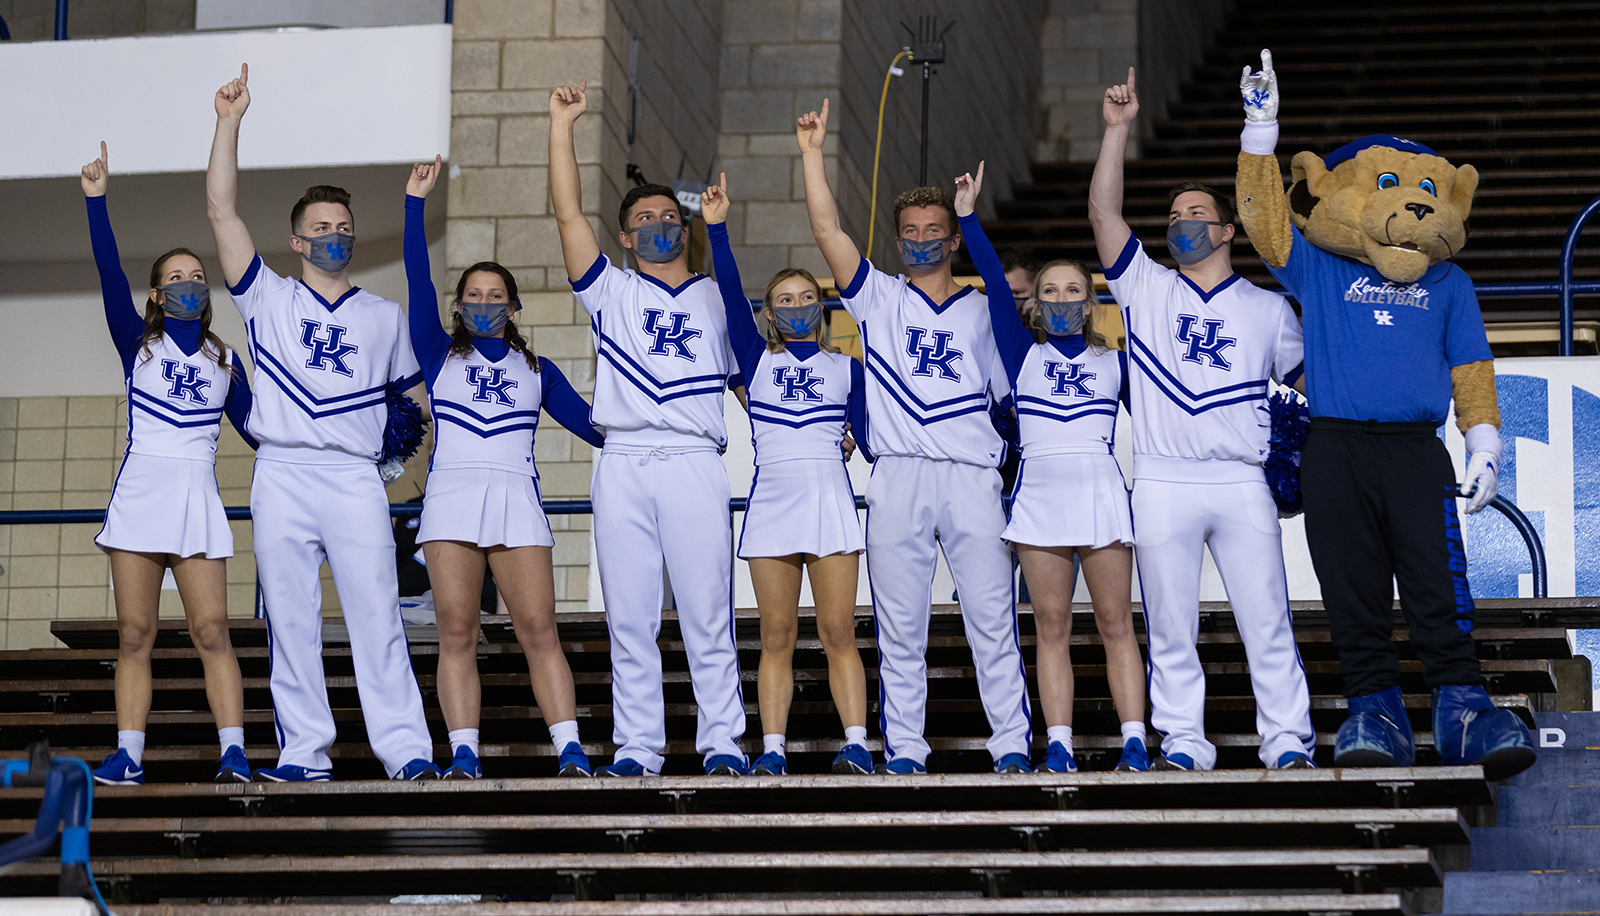 Kentucky Cheerleading White/Gameday Squad Competing for Title Virtually